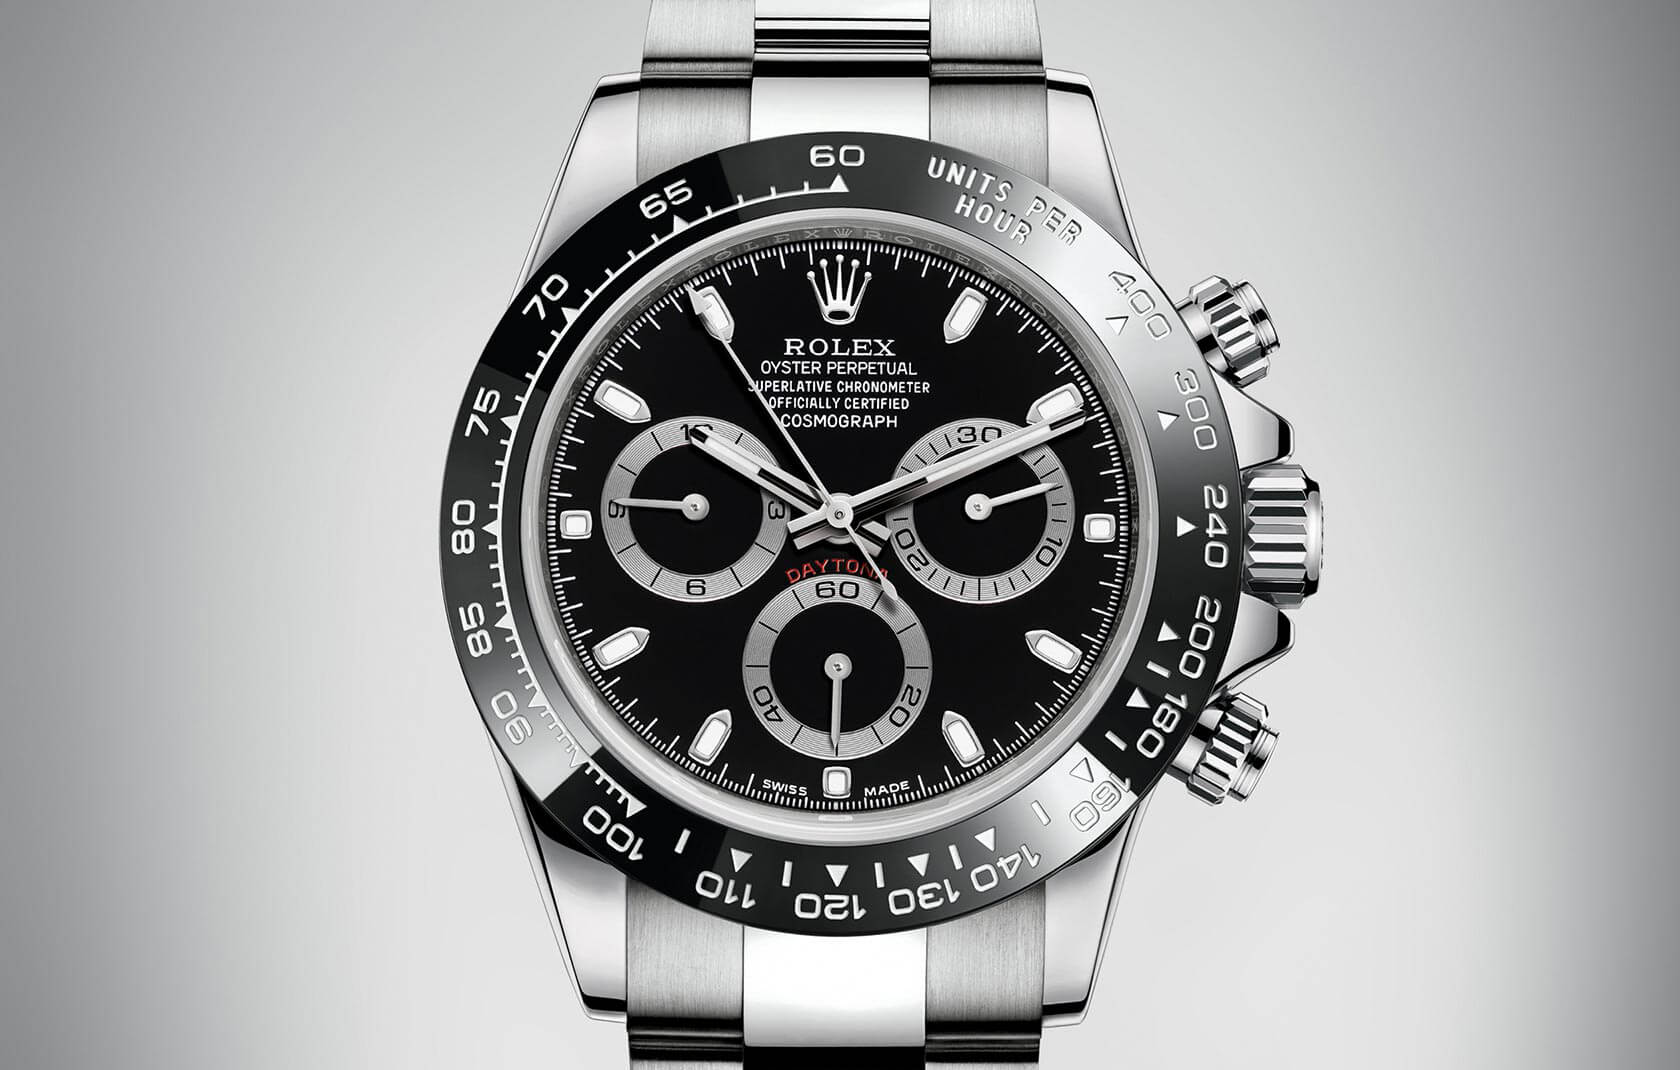 Introducing: The New Rolex Daytona, Now 